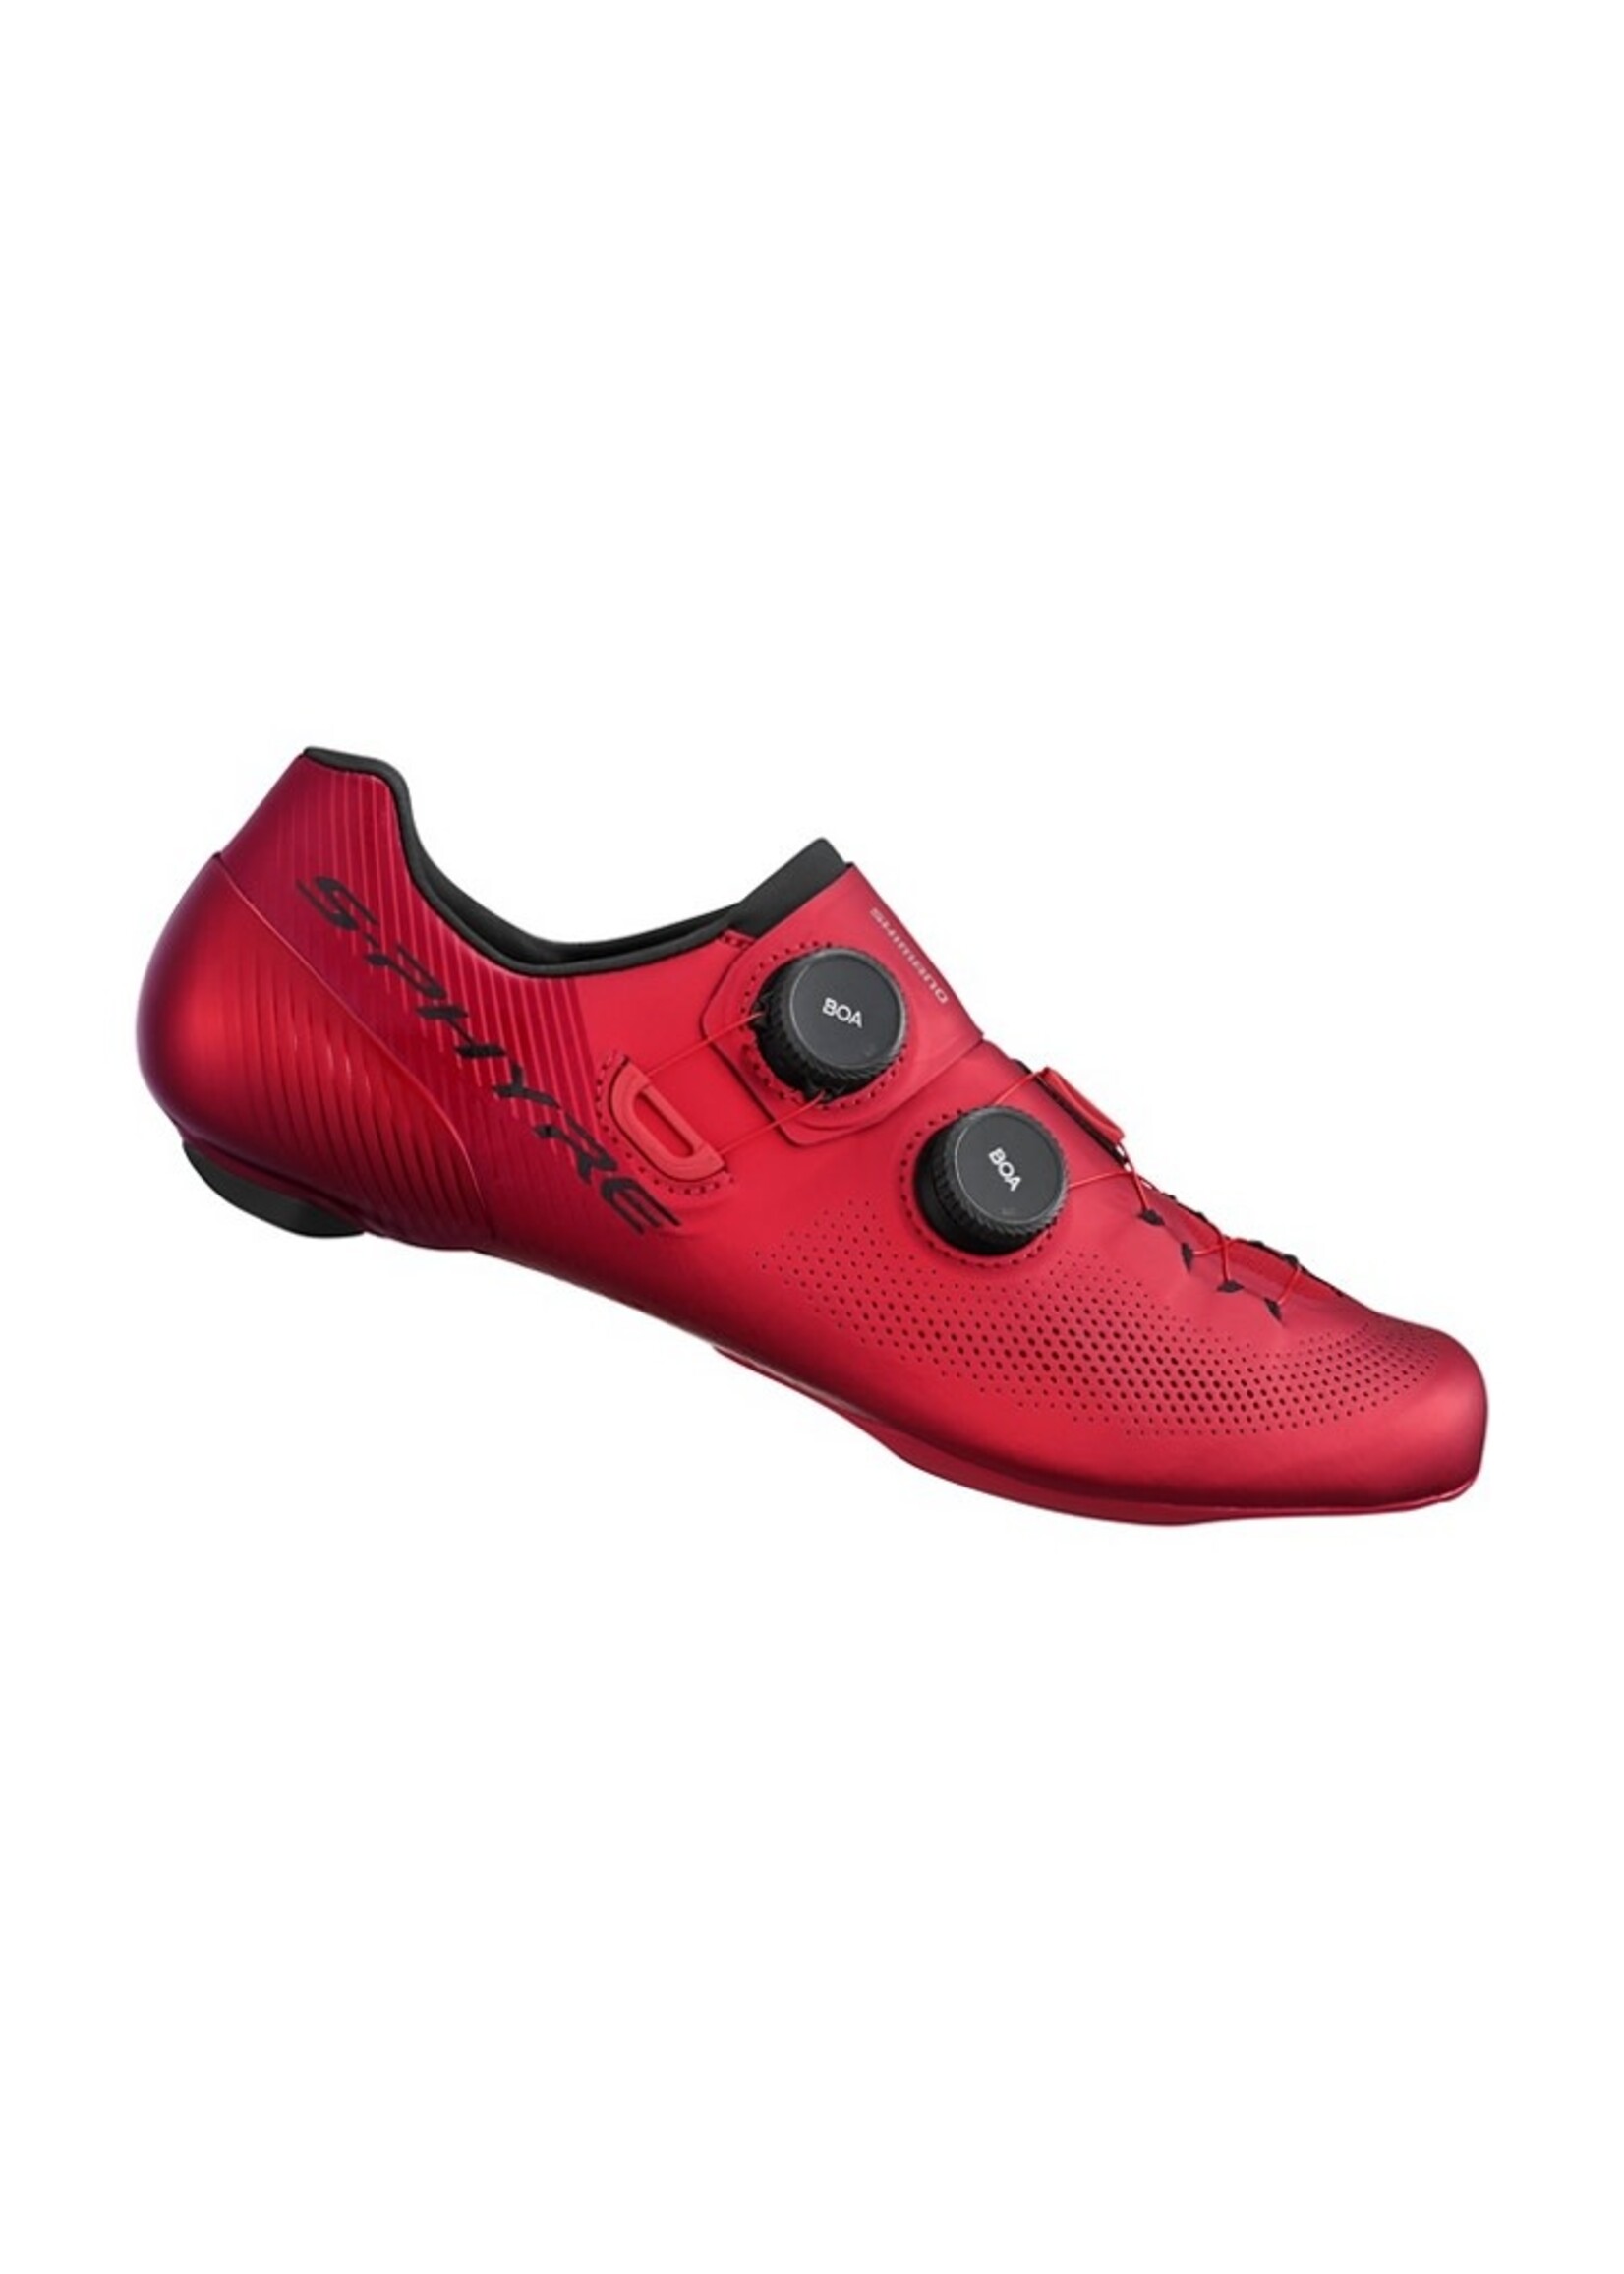 Shimano SH-RC902 SPHYRE BICYCLE SHOES|RED 44.0